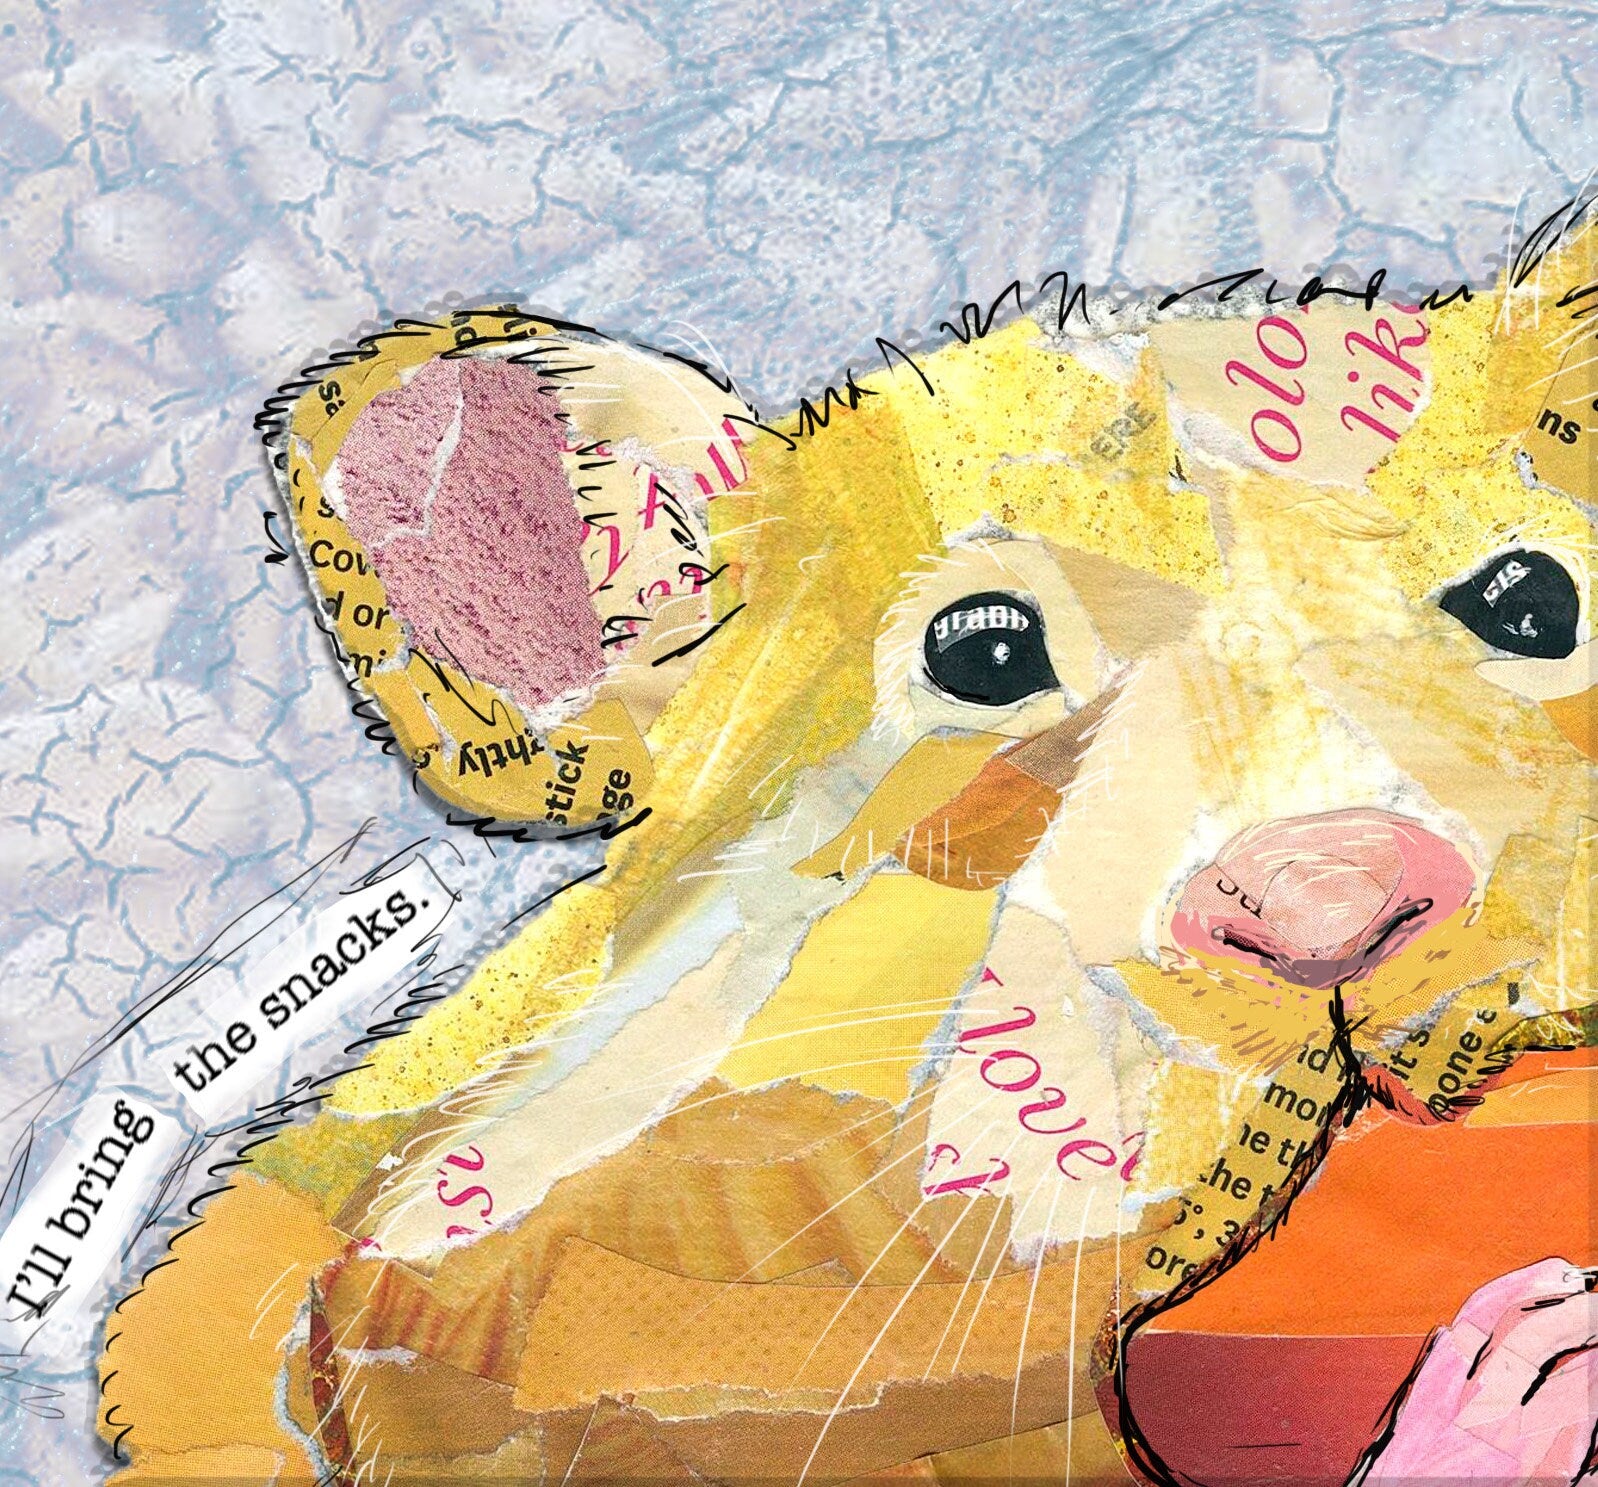 8x10 Art Print of a mixed media collage of a yellow blond Hamster, pets, carrot, eating - funny text